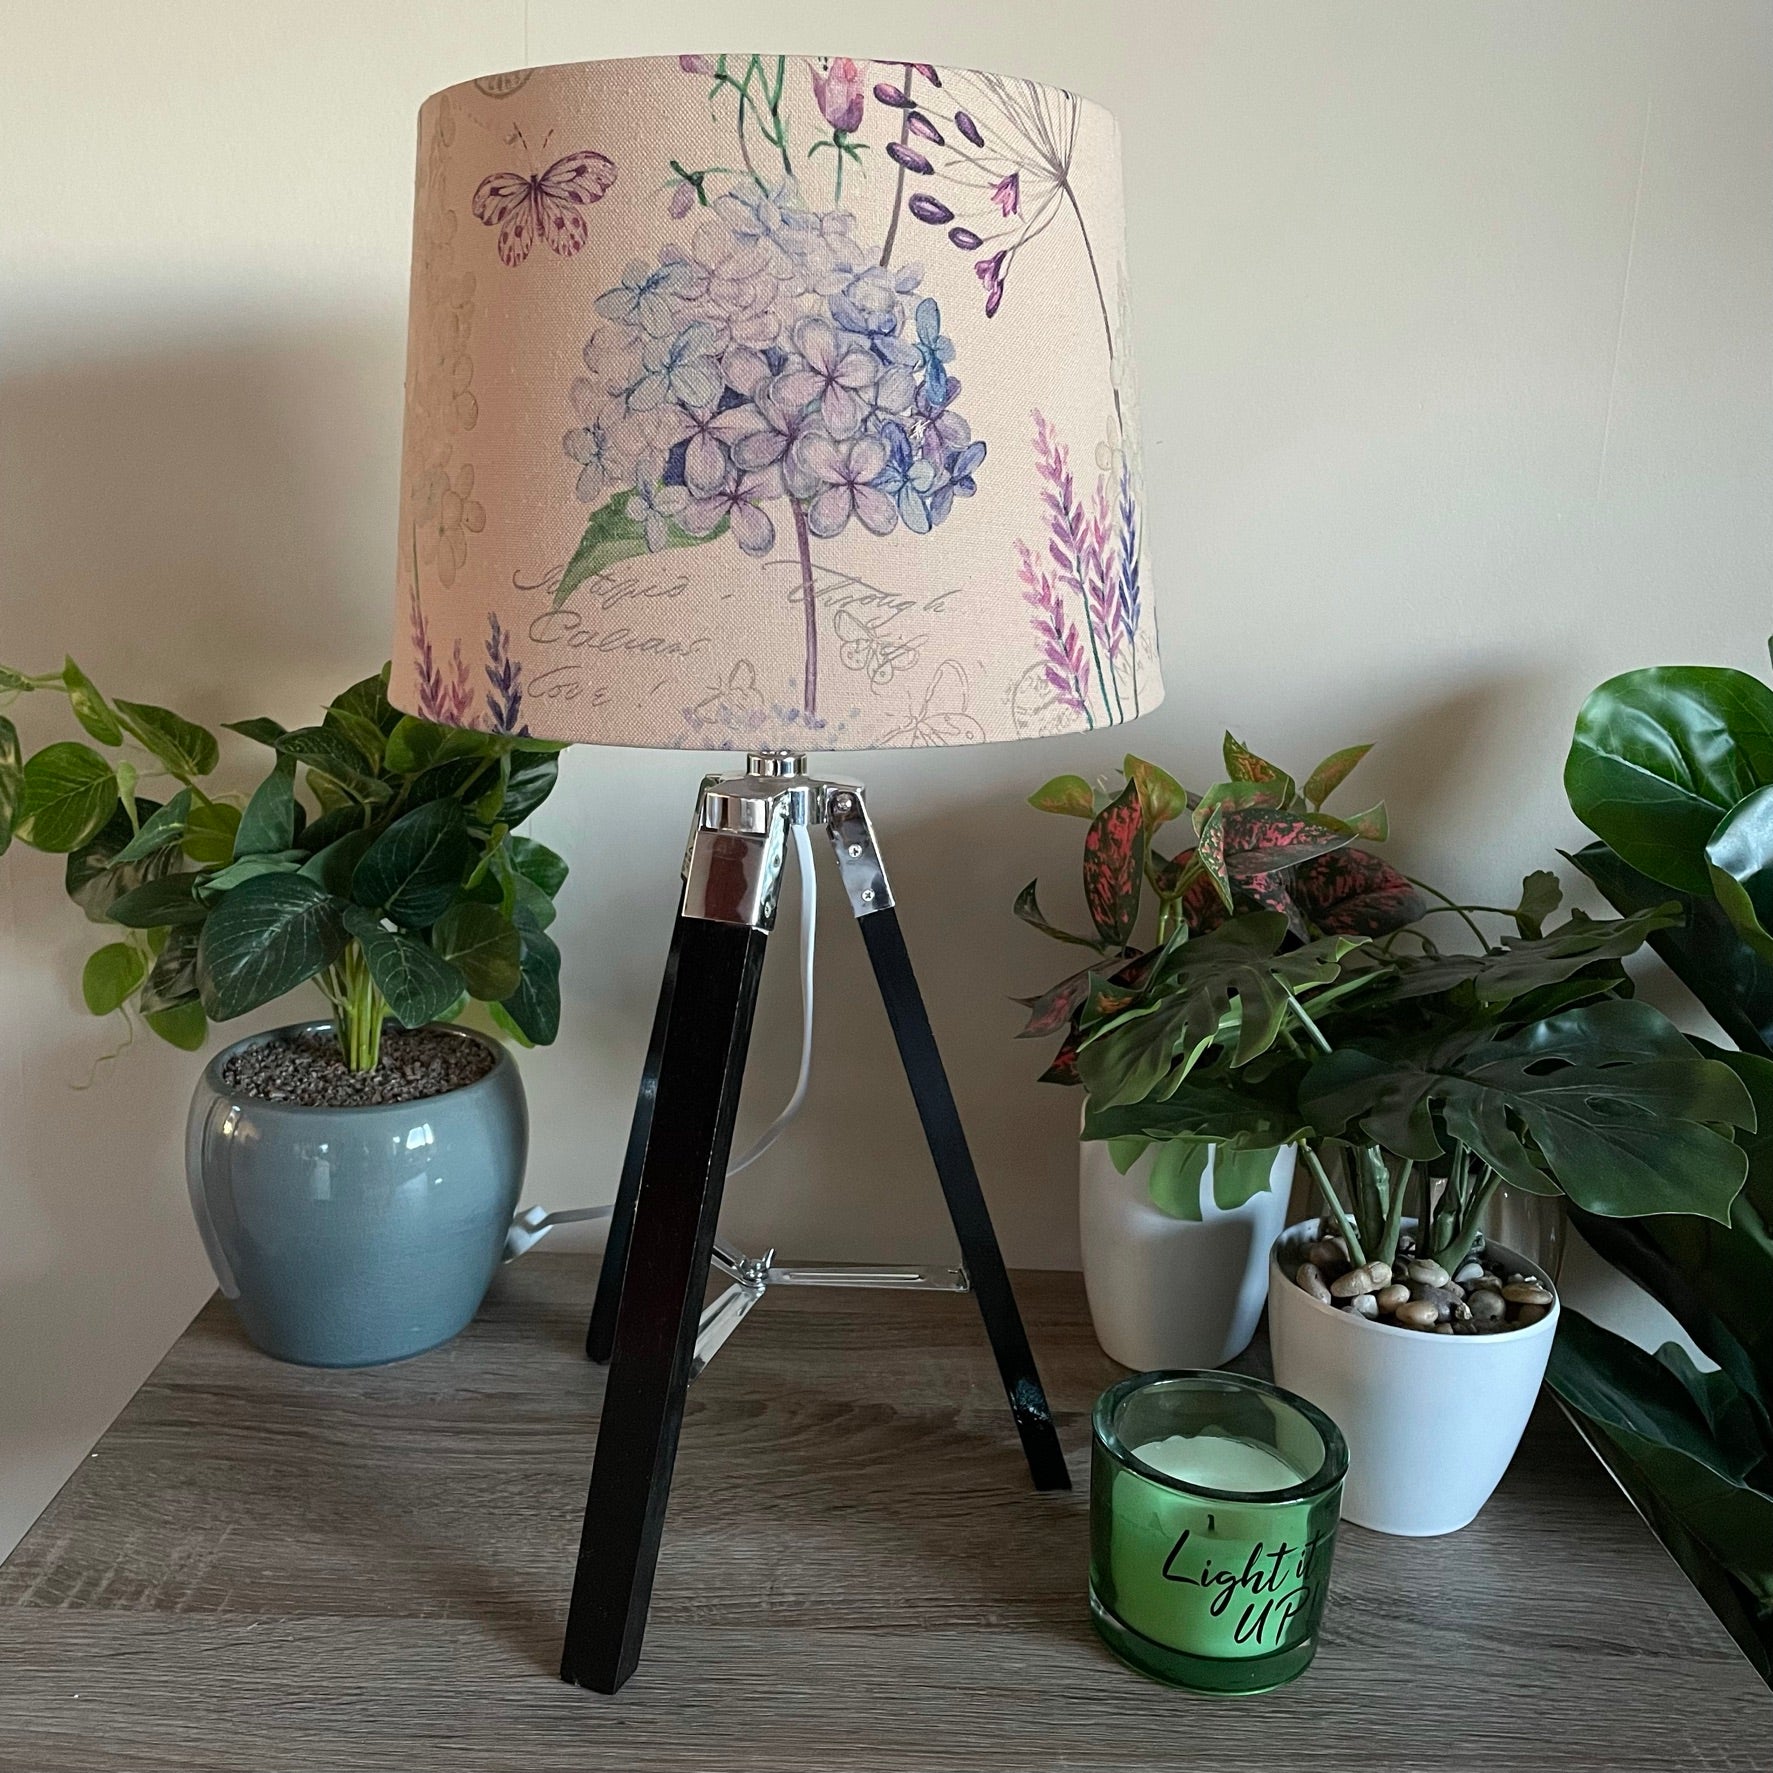 Shades at Grays Table lamp Medium tapered light shade Black gloss tripod table lamp - your fabric choice handcrafted lighting made in new zealand